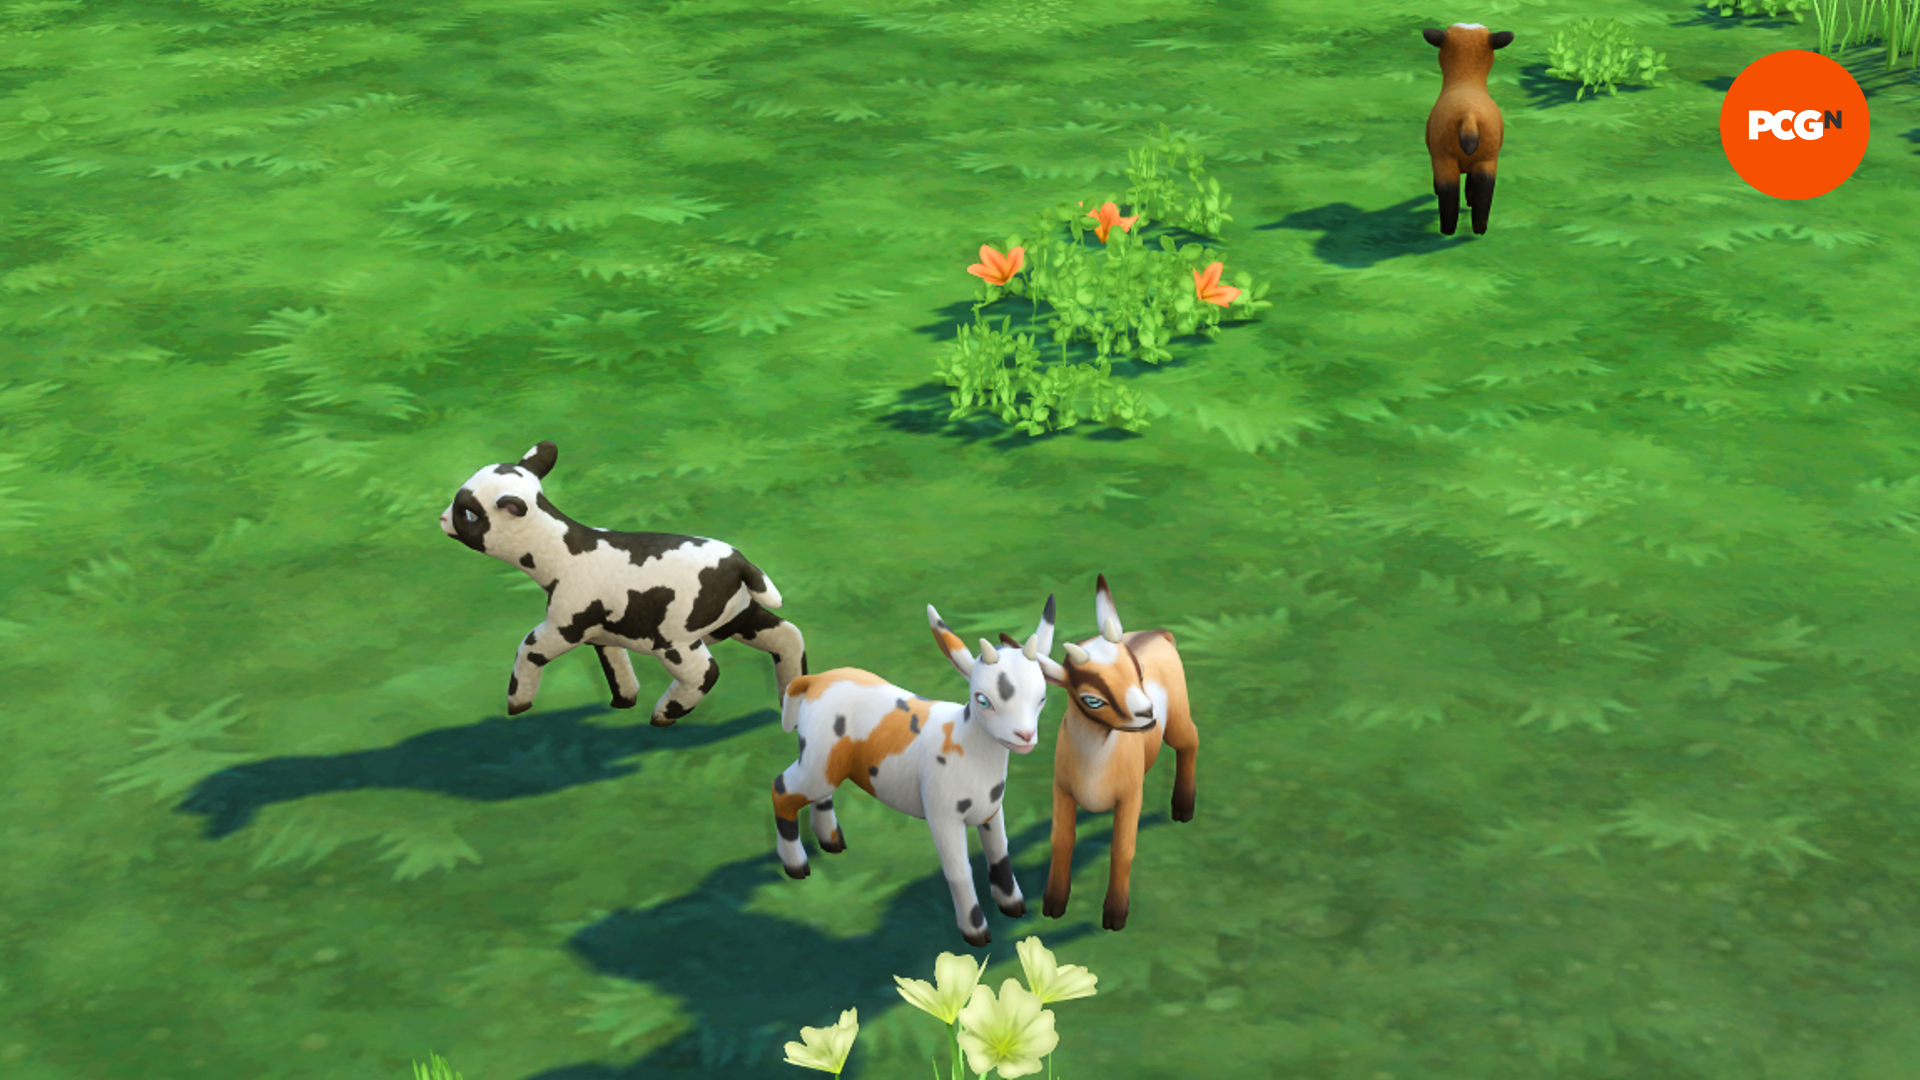 A group of four goats, each with a different color and pattern, stand in a grassy field full of flowers